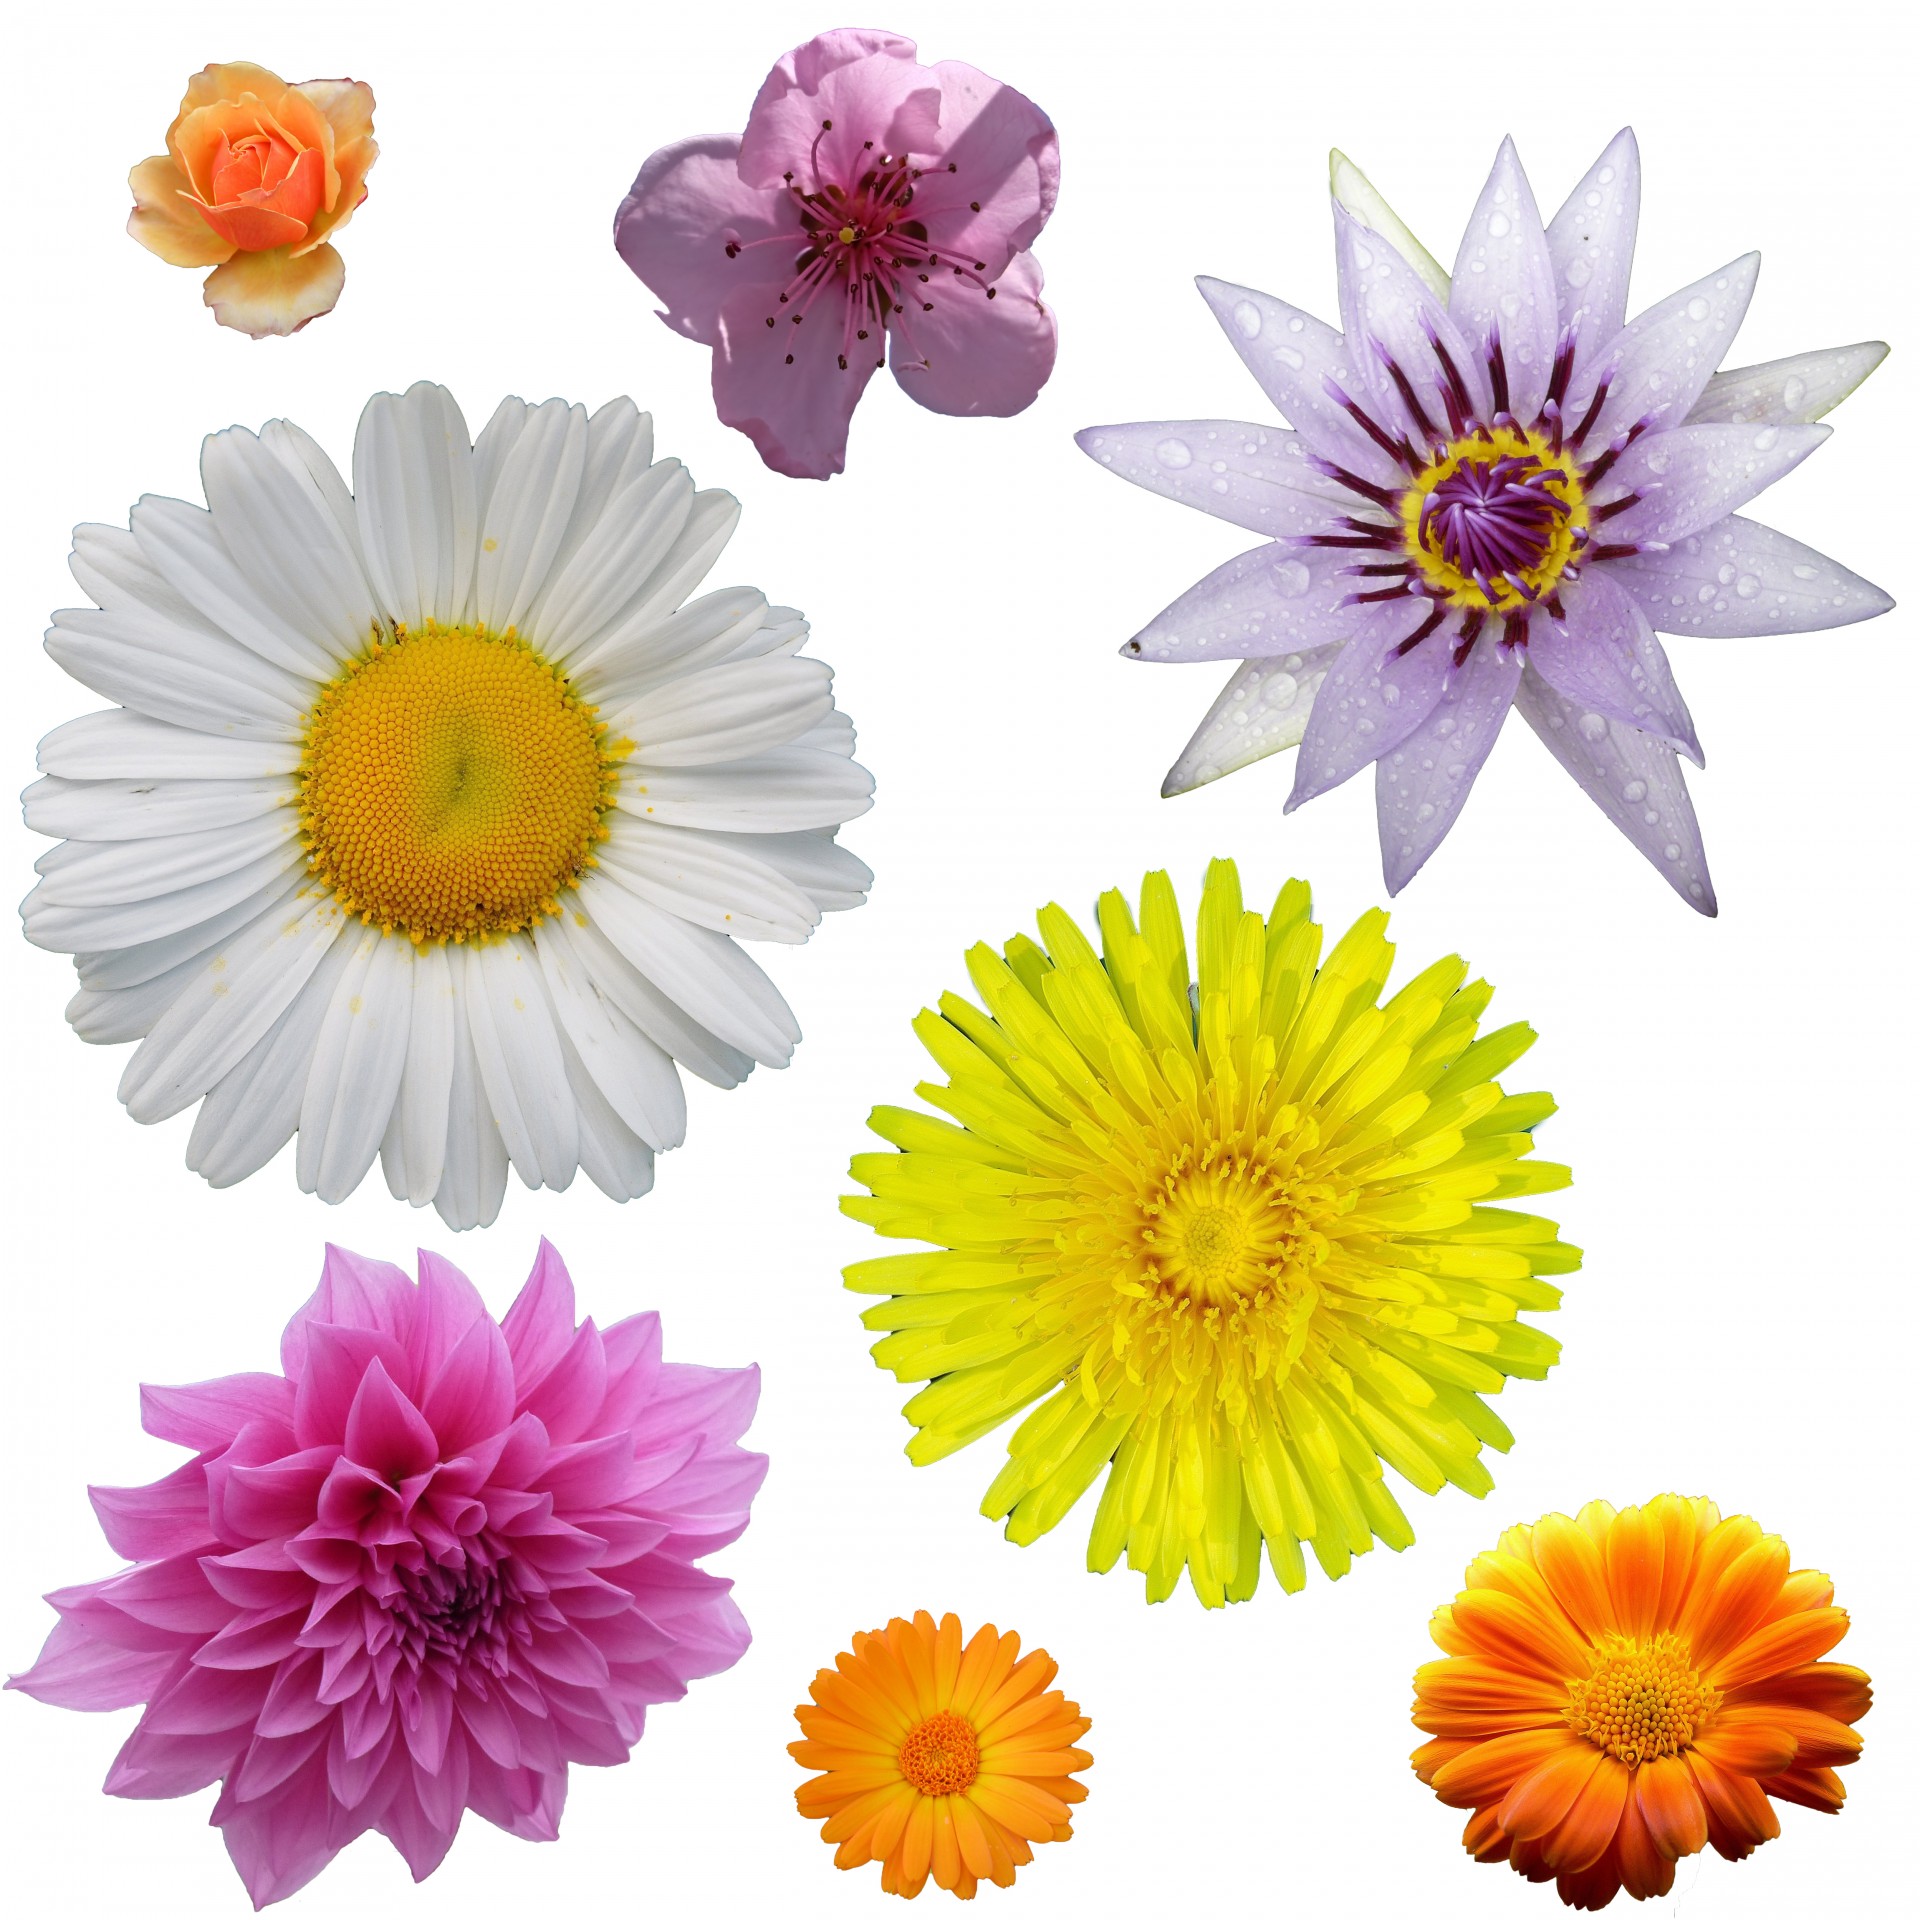 Isolated Flower Clipart Free Stock Photo - Public Domain Pictures